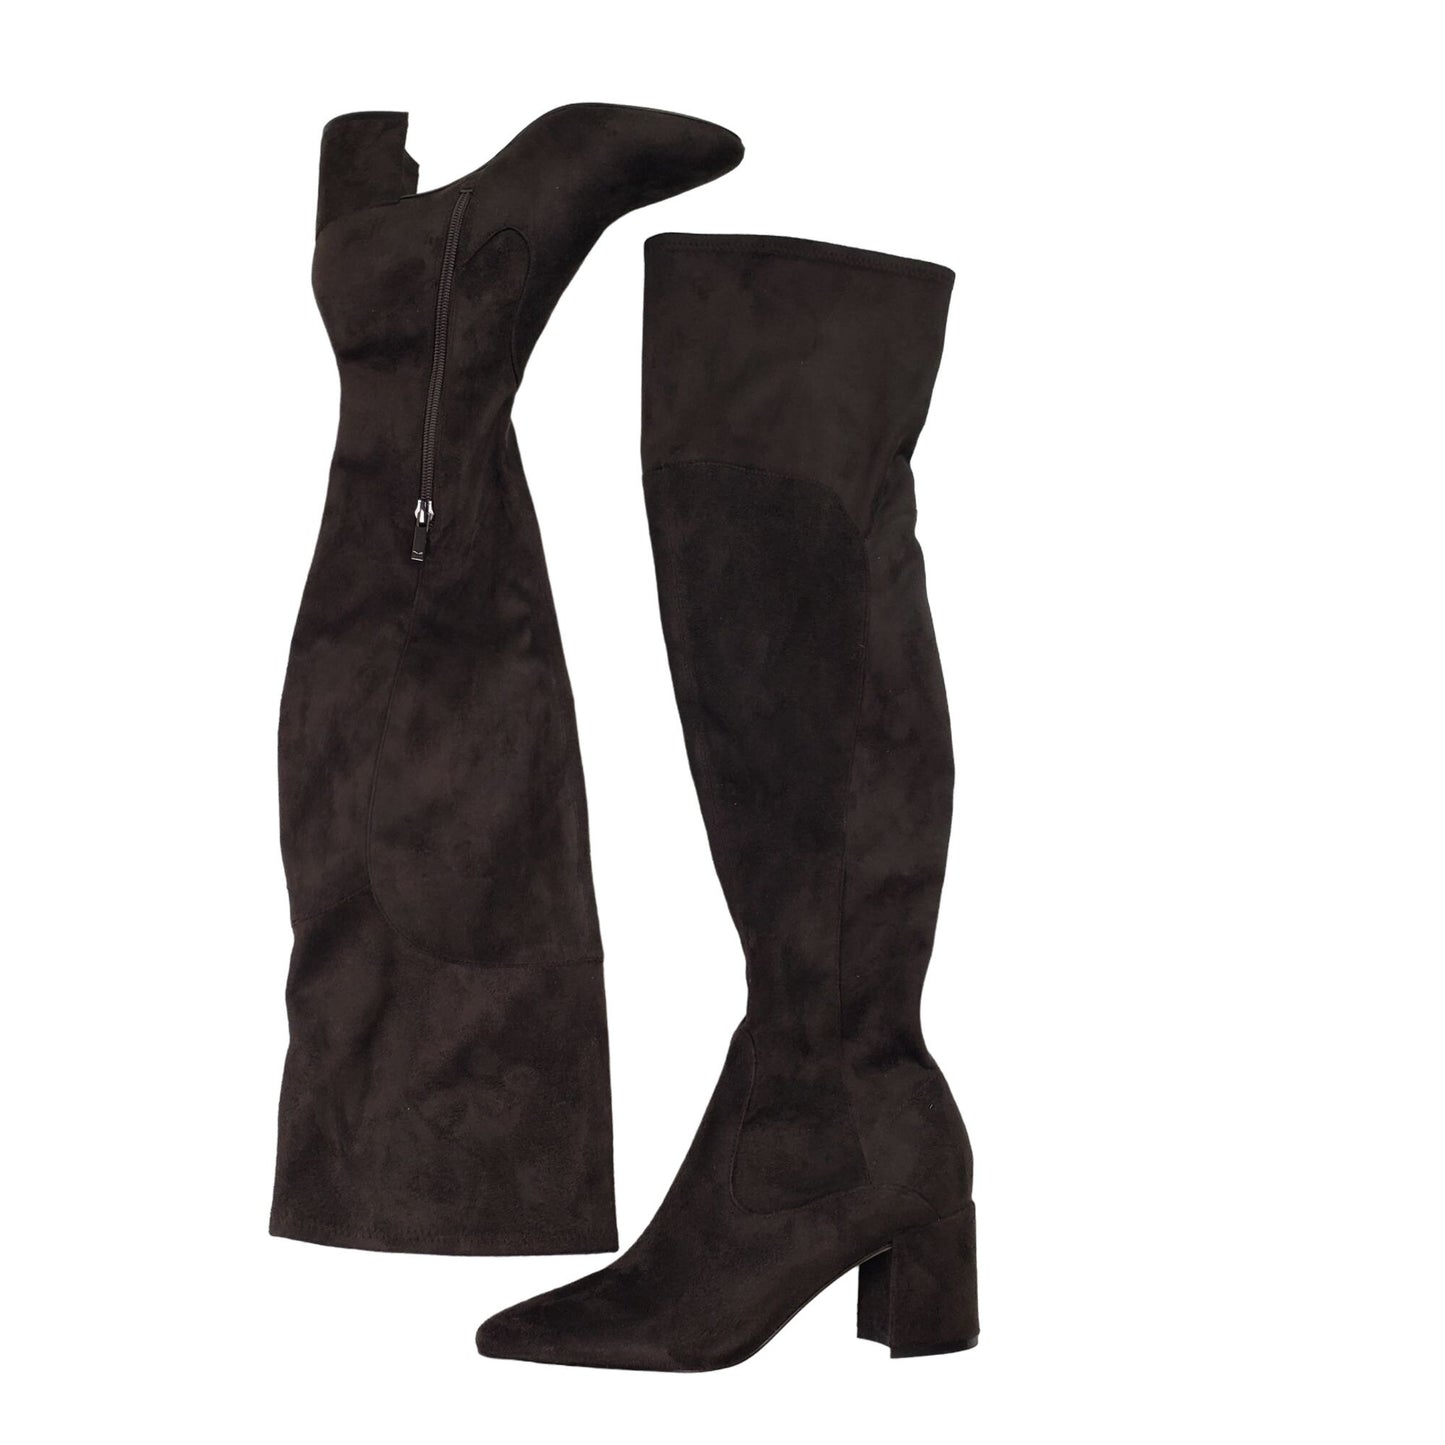 NWT/NWOB Marc Fisher Jayne Suede Leather Over the Knee Boots Size 6.5